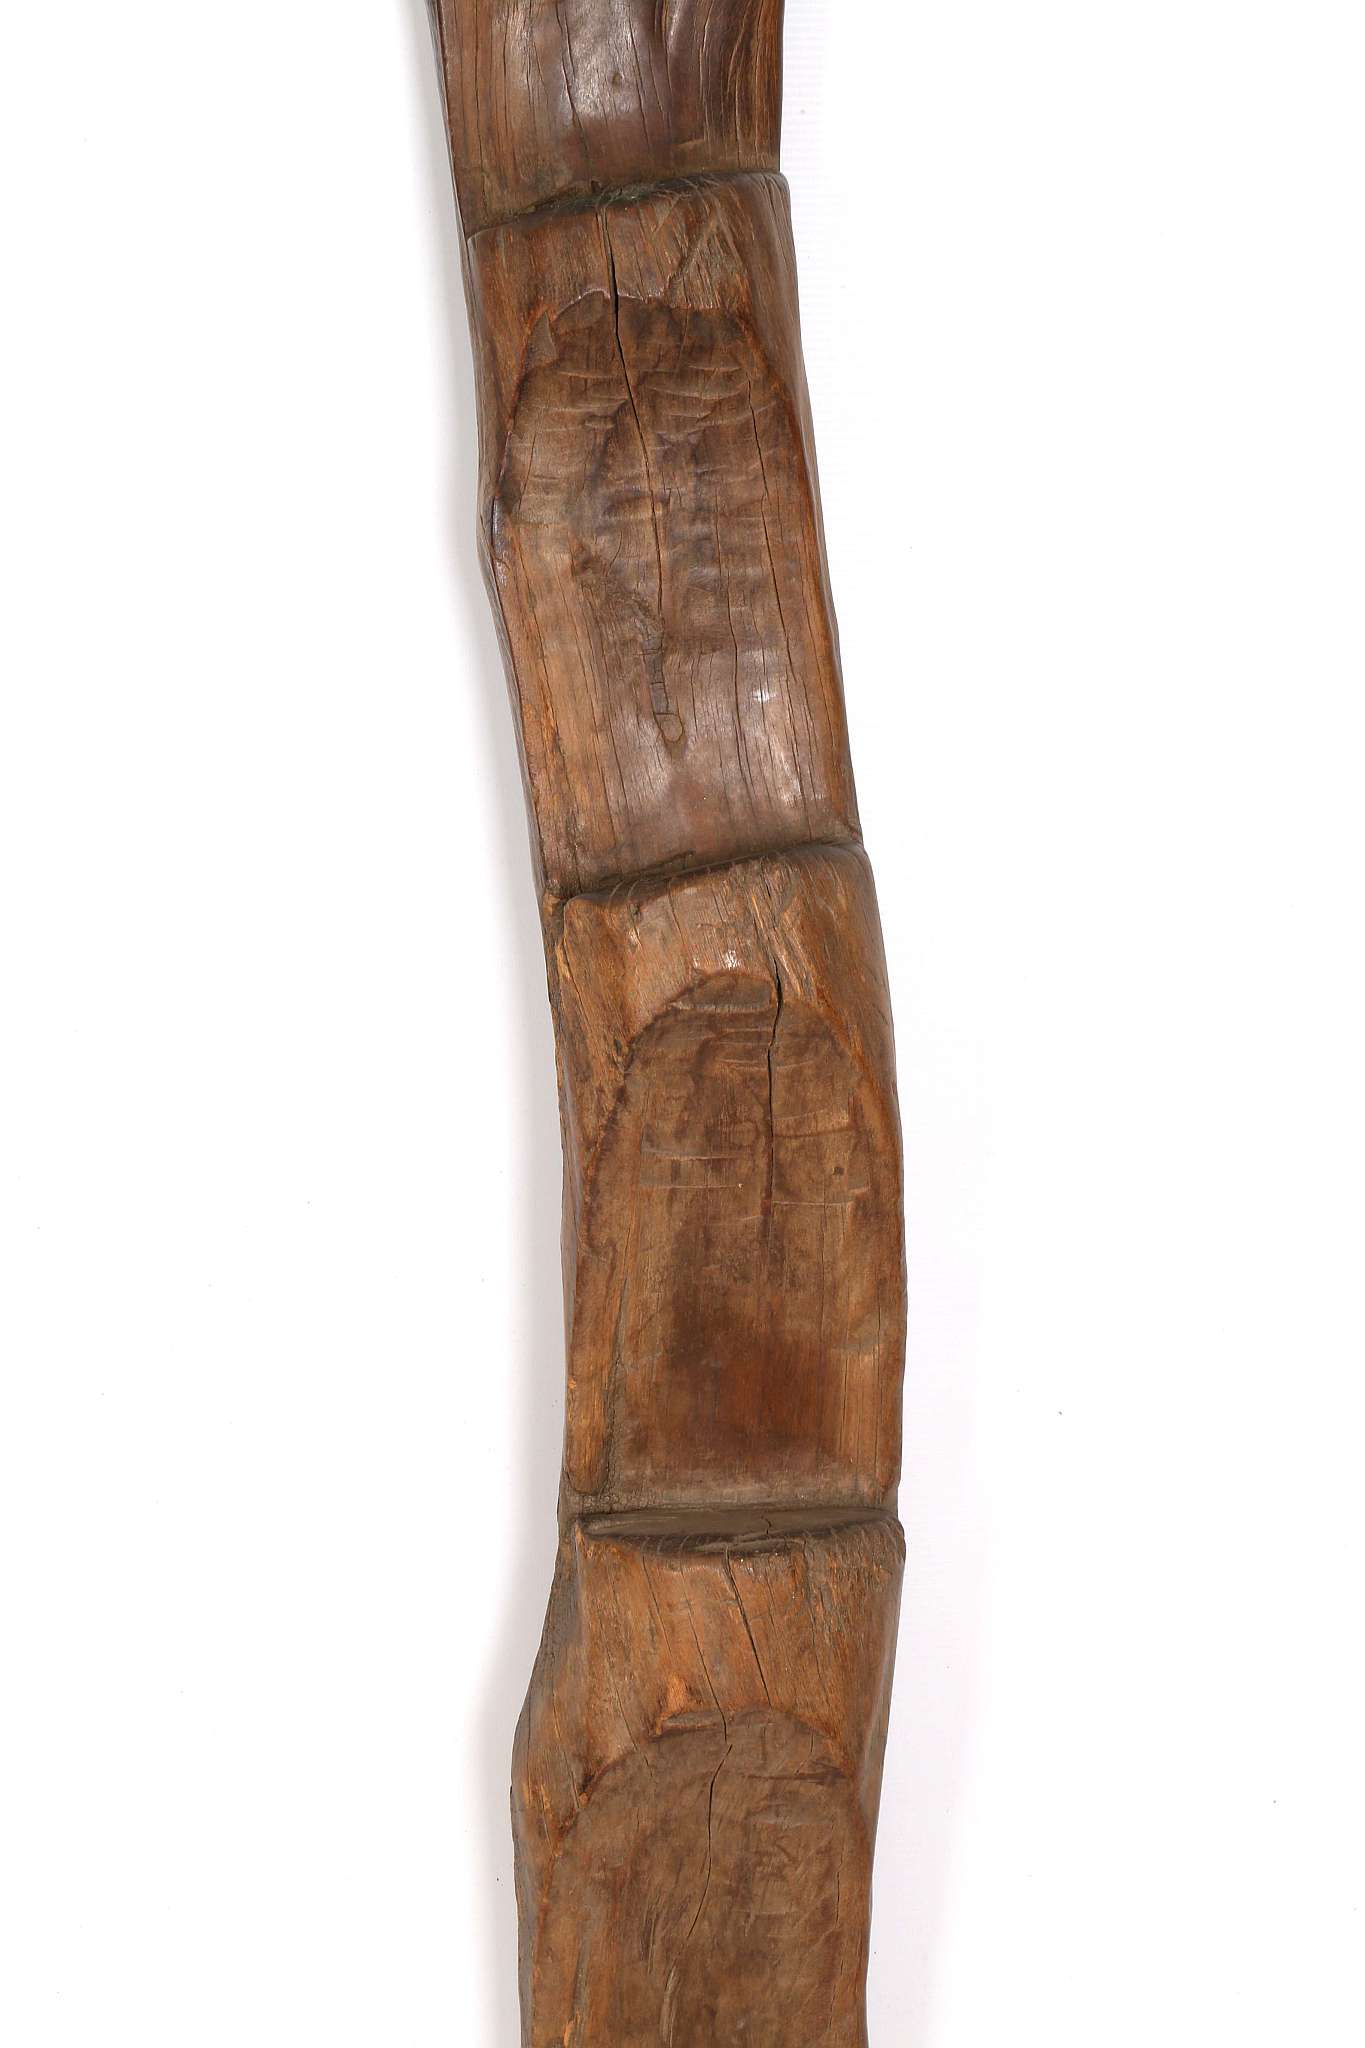 A DOGON LADDER, MALI Of typical stepped, Y-shaped form, with shiny brown patina, 163cm high - Image 3 of 4